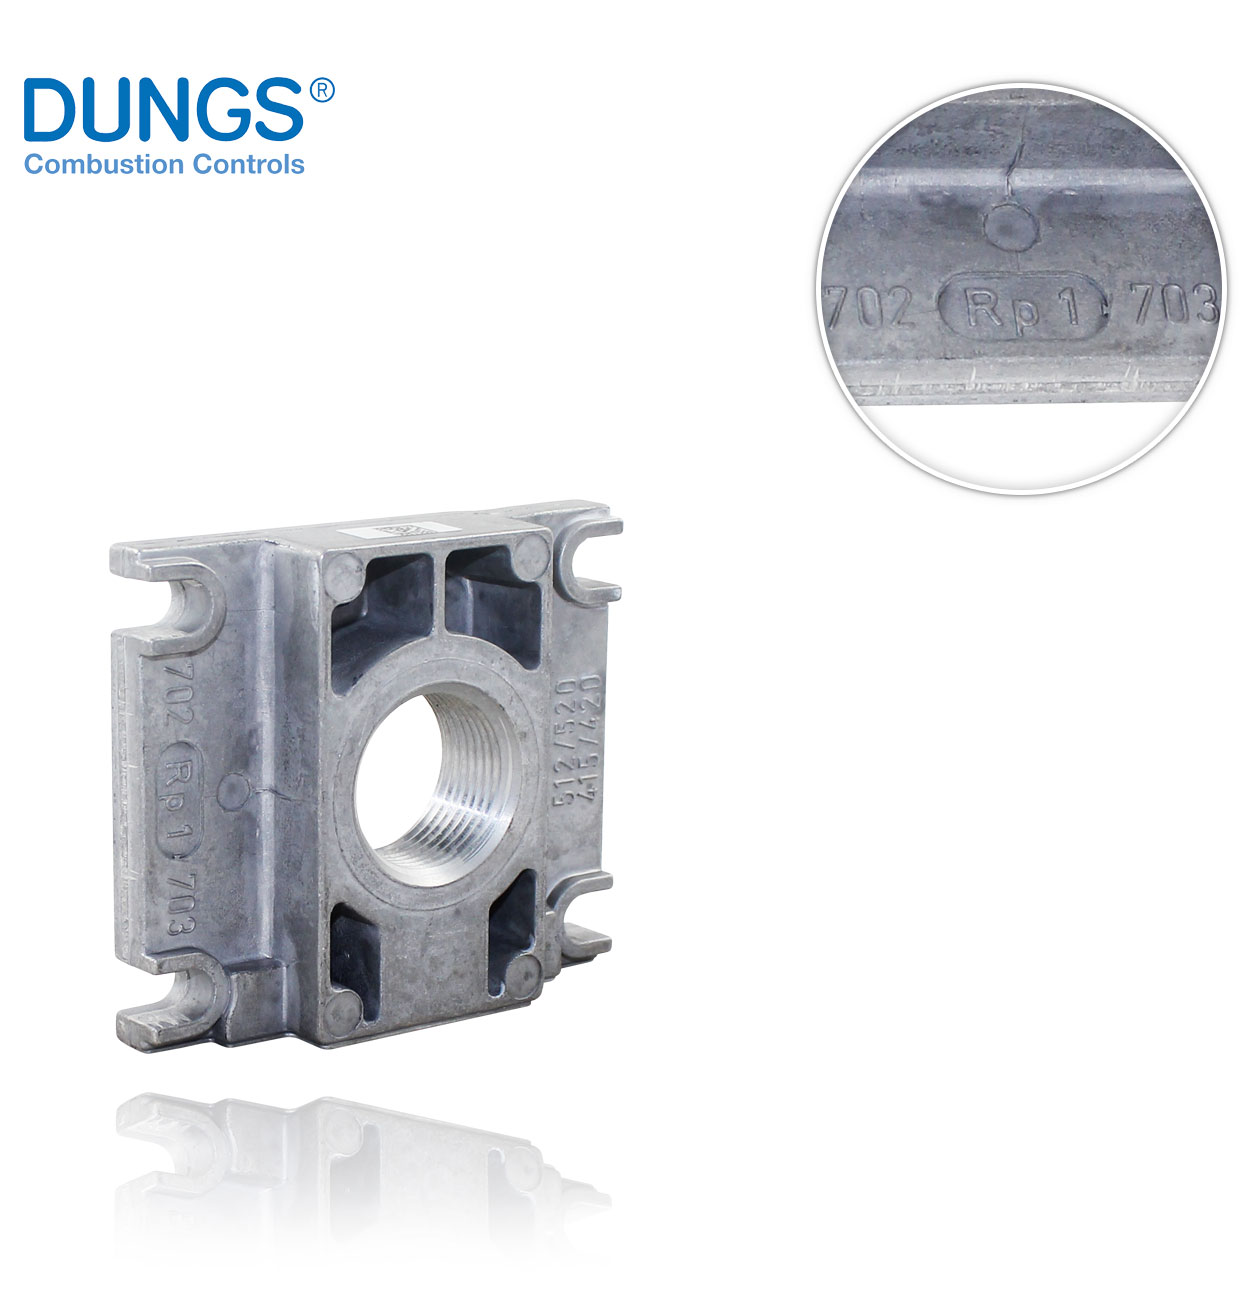 FLANGE WITH PLUG R1" FOR DMV 512/11+520/11 DUNGS